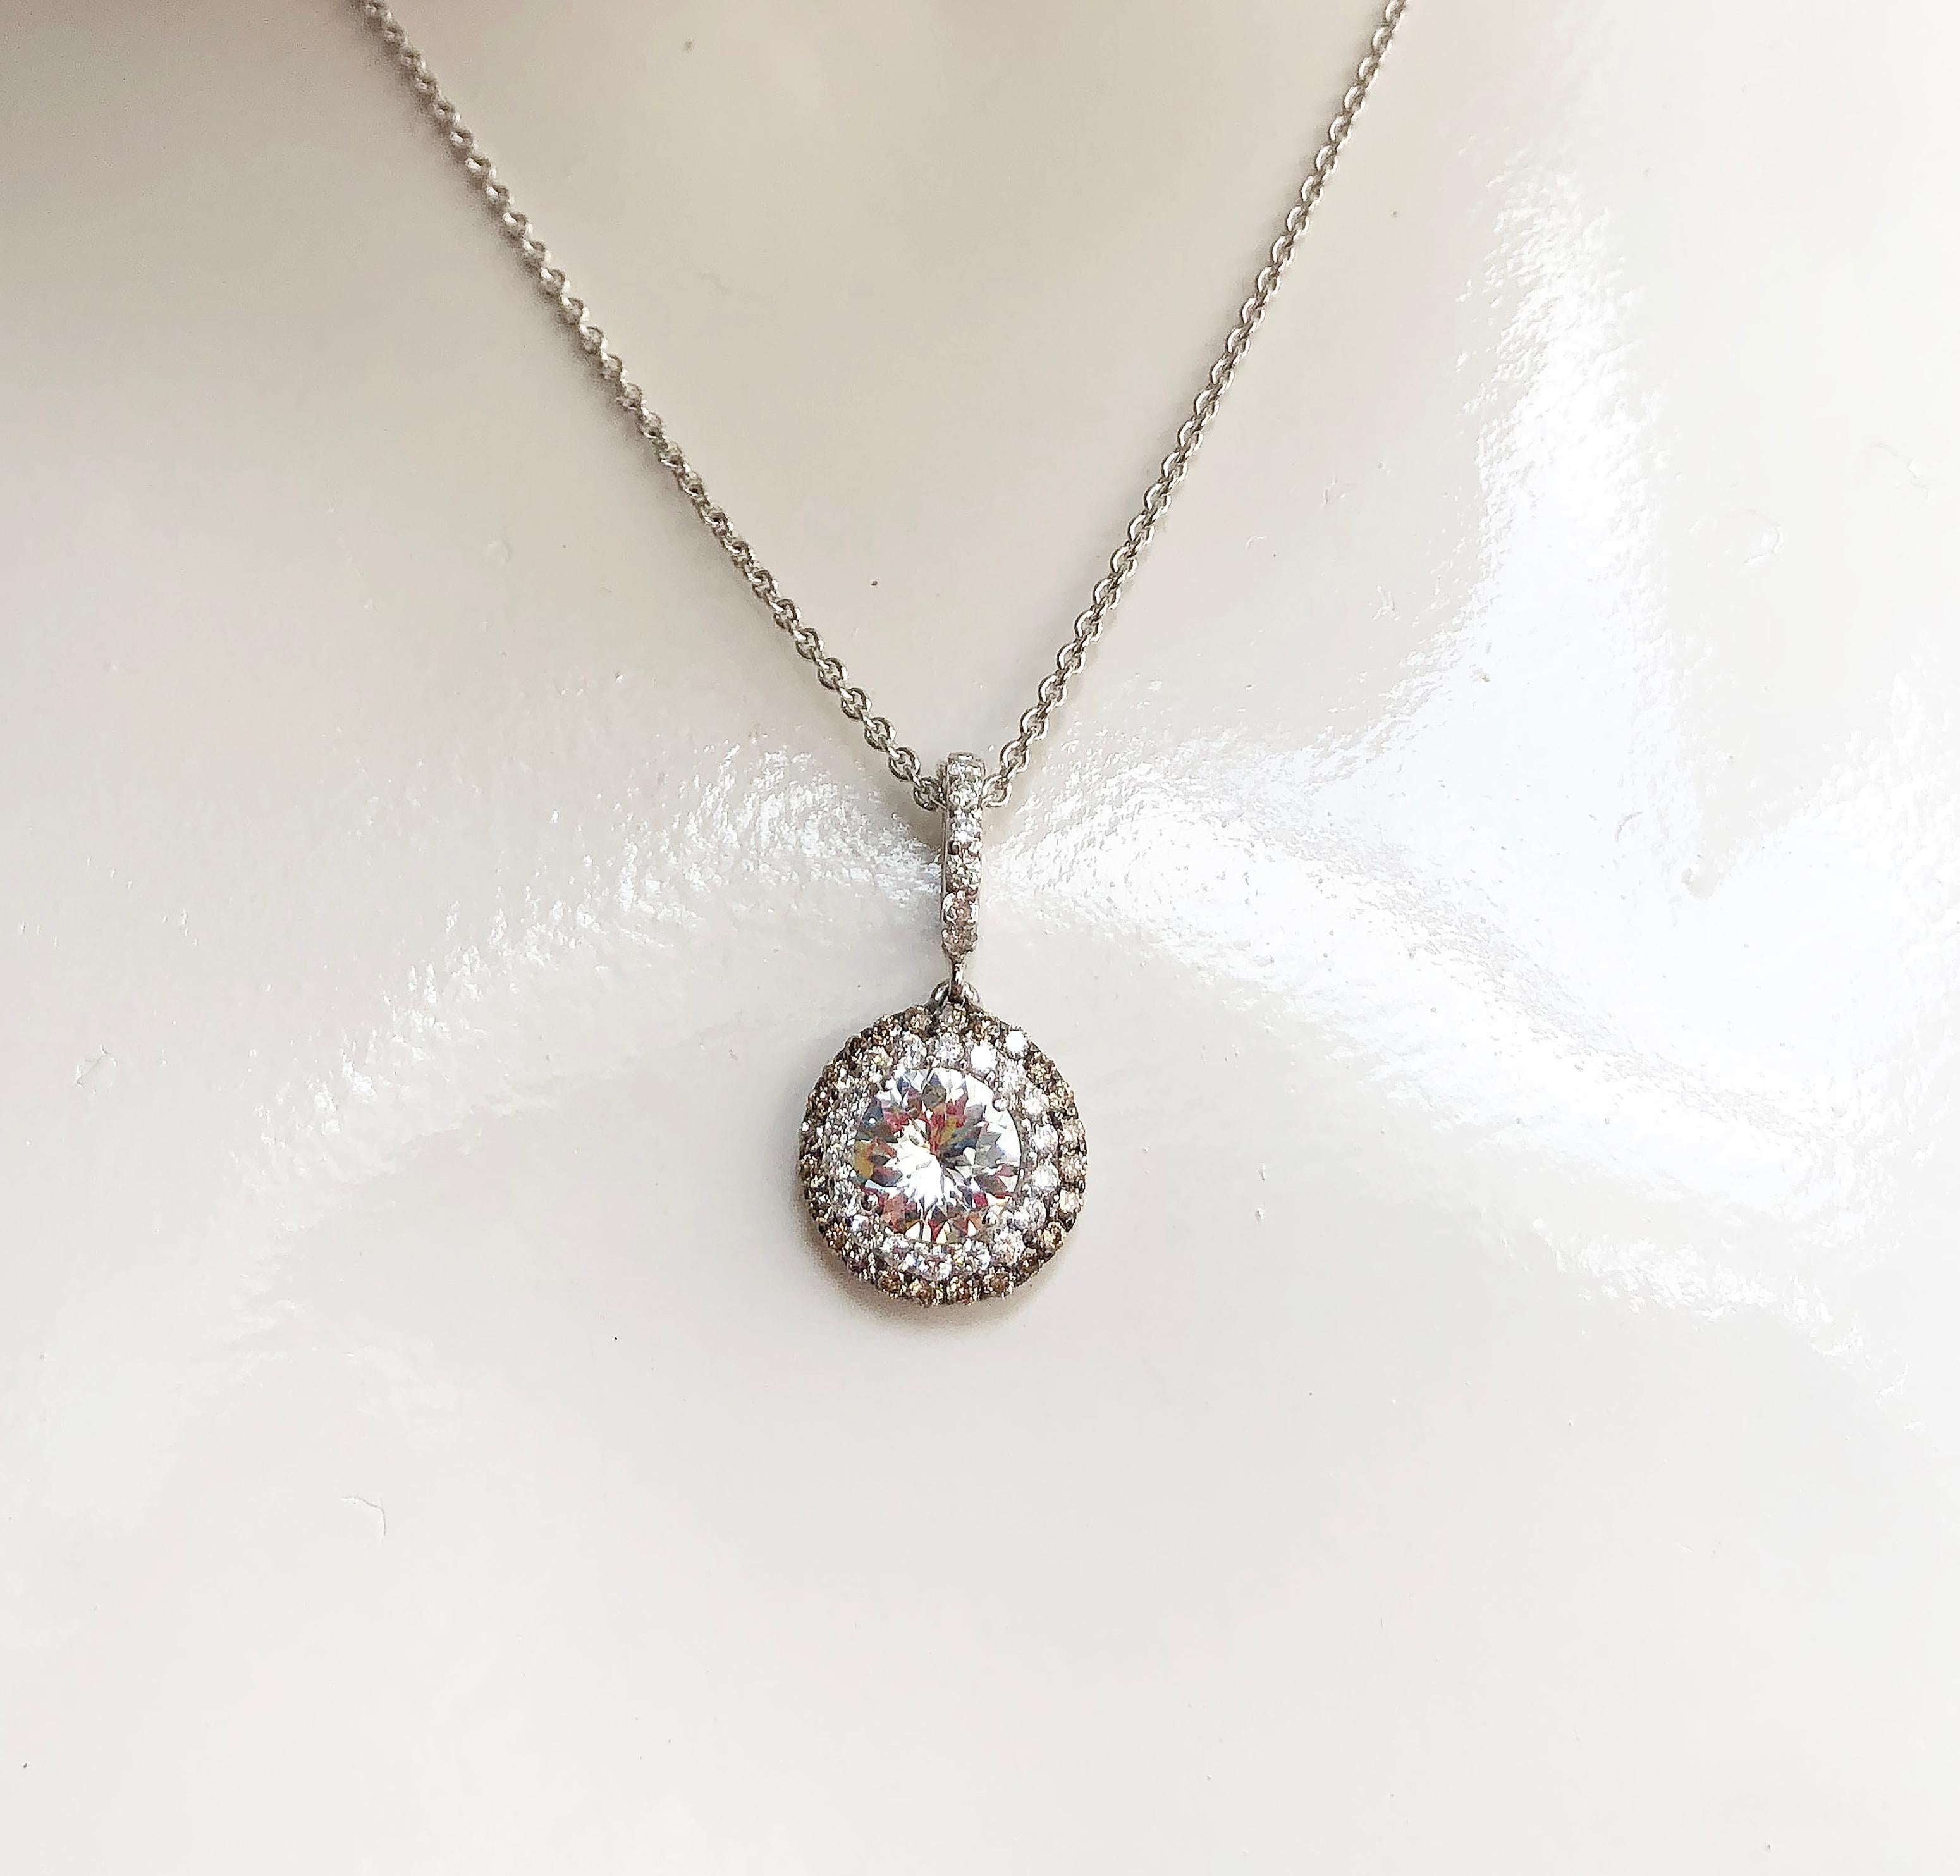 White Sapphire 1.33 carats with Brown Diamond 0.29 carat and Diamond  0.33 carats Pendant set in 18 Karat White Gold Settings
(chain not included)

Width: 1.3 cm
Length: 2.4 cm 

